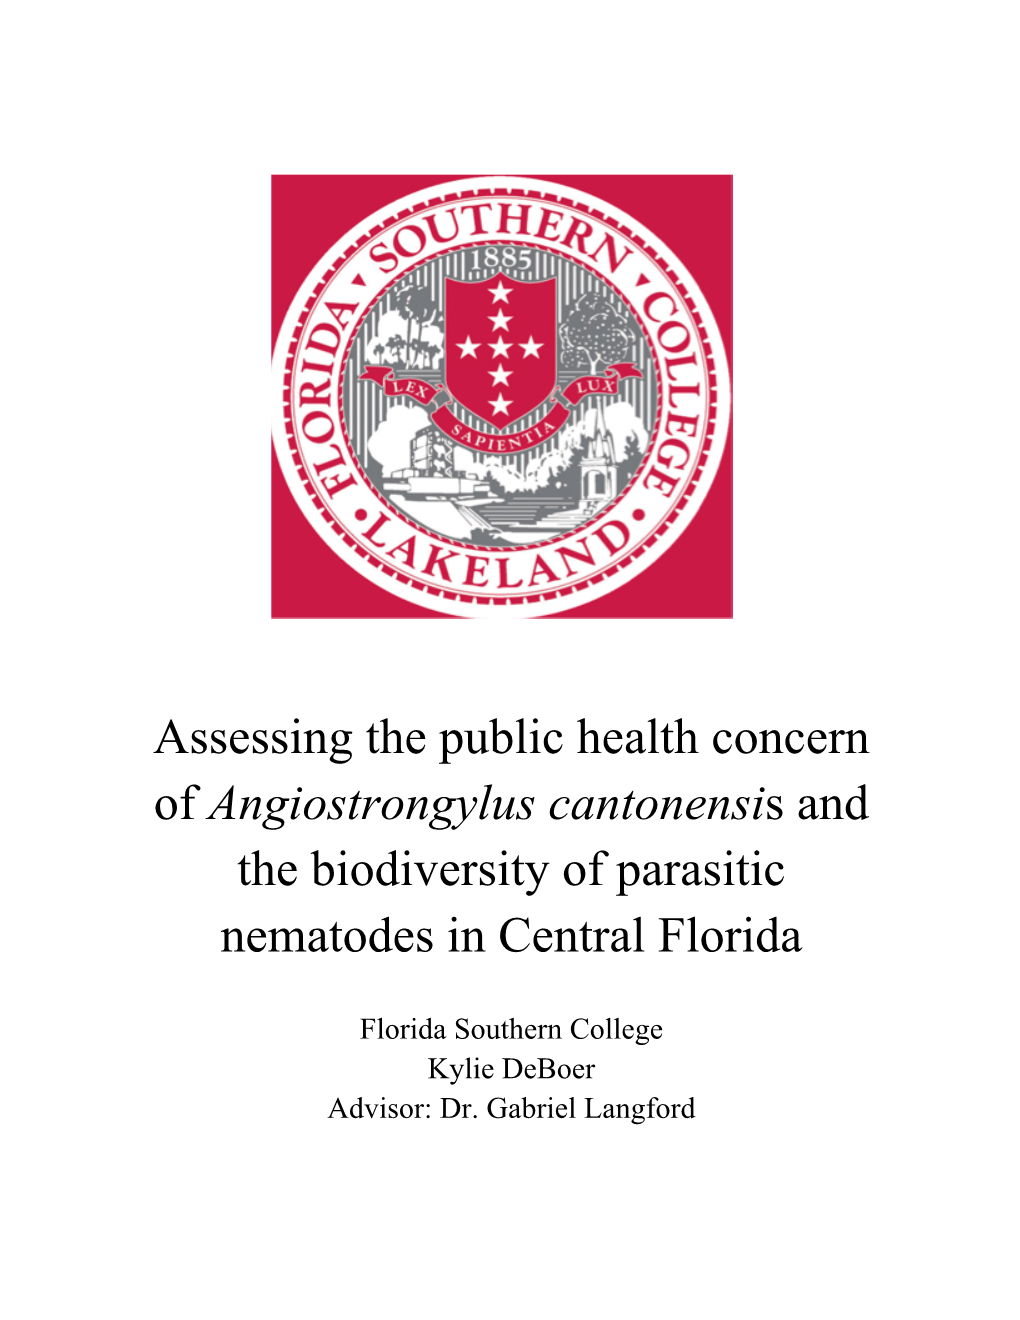 Angiostrongylus Cantonensis and the Biodiversity of Parasitic Nematodes in Central Florida